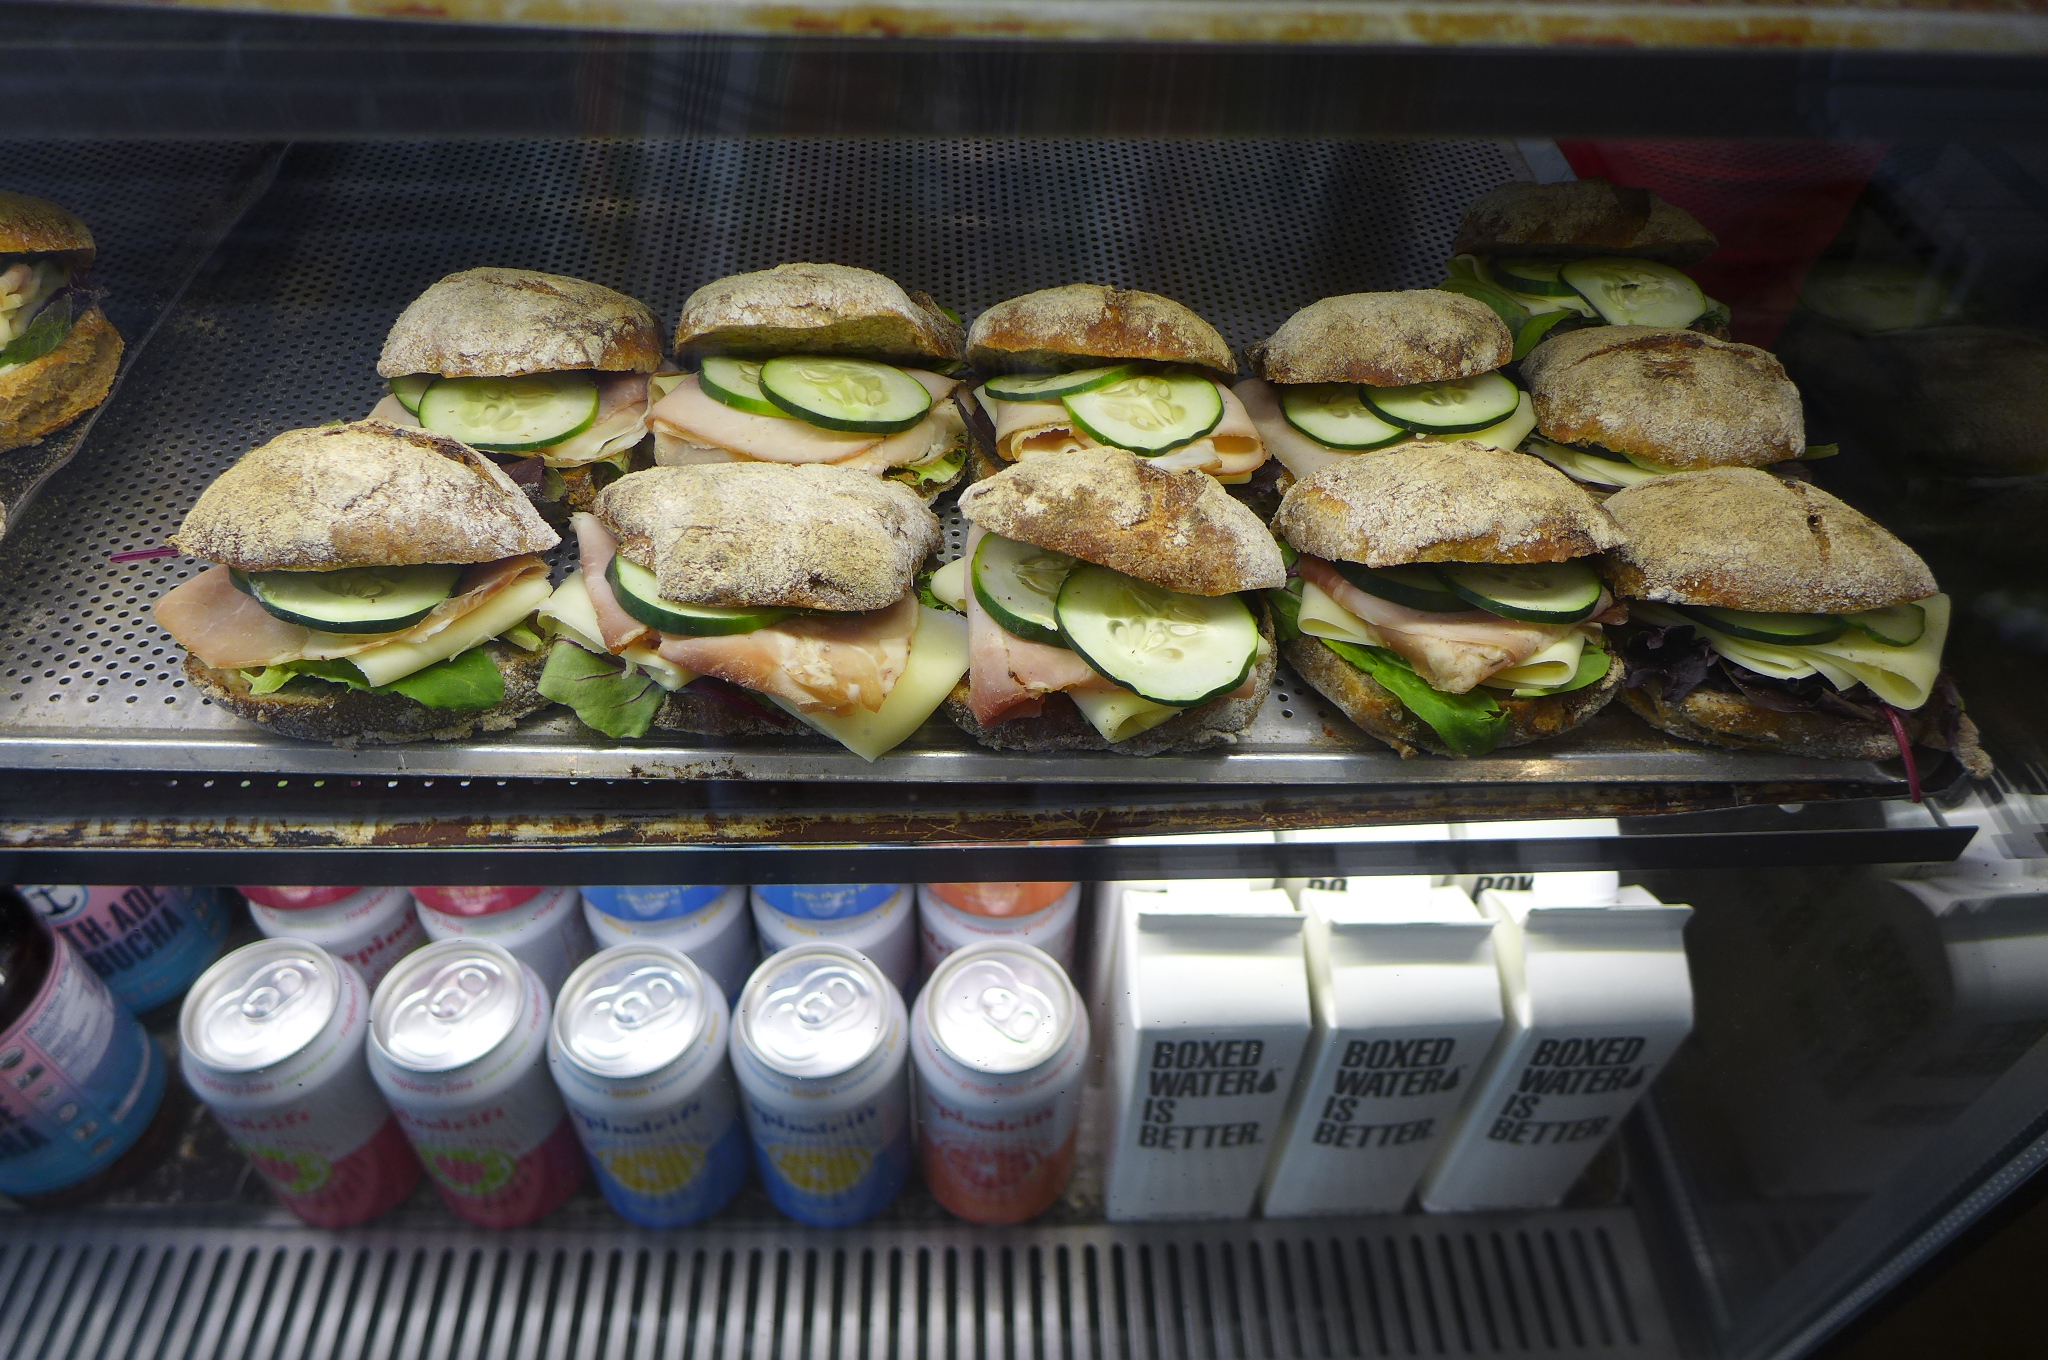 A glass case with sandwiches lines up.